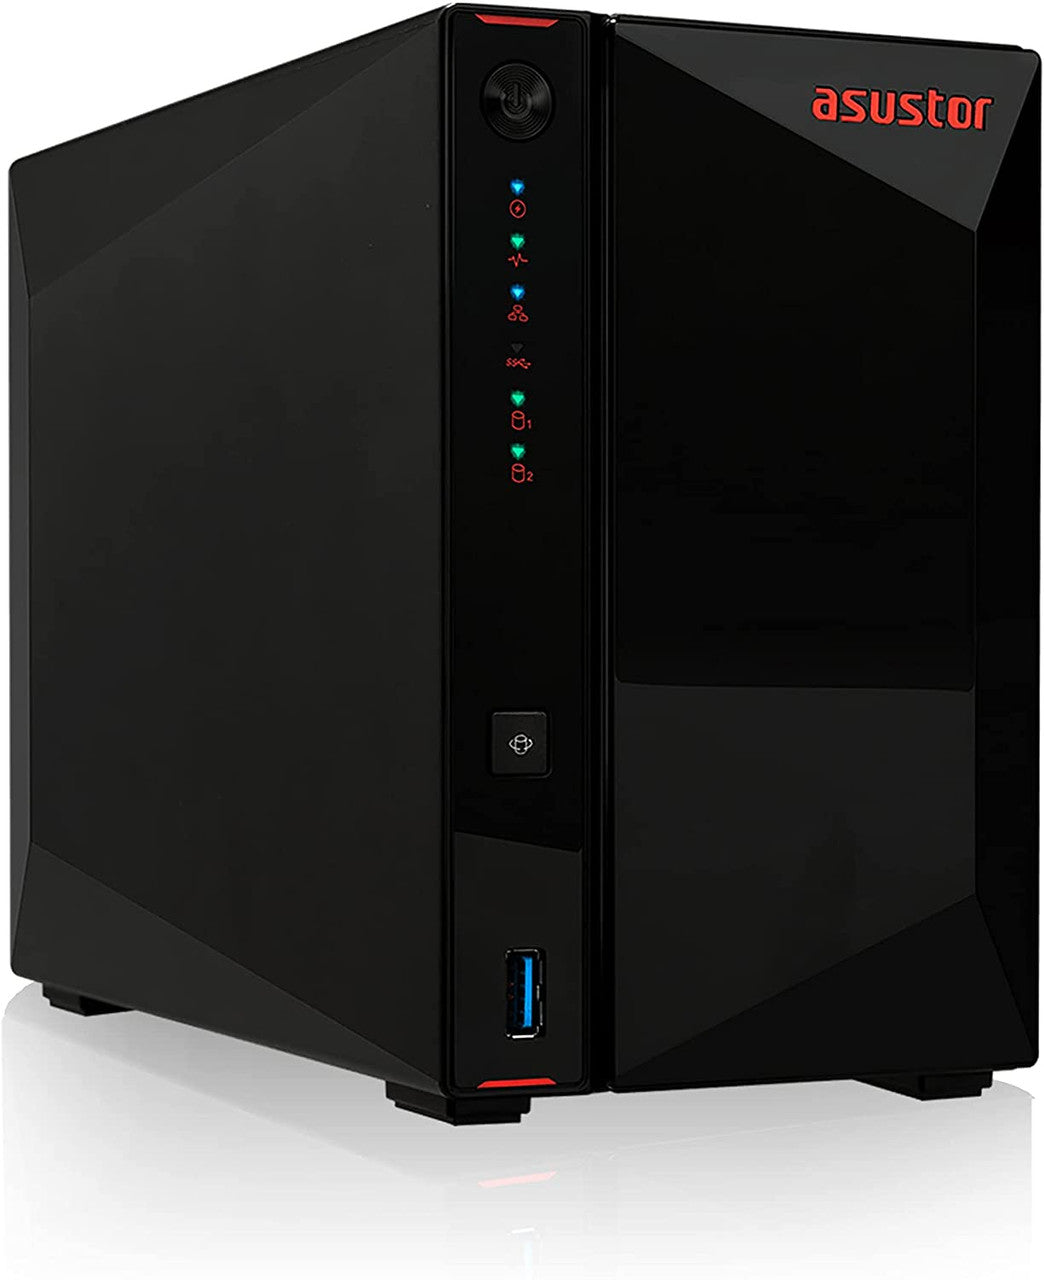 Asustor AS5202T 2-Bay Nimbustor 2 NAS with 8GB RAM and 32TB (2 x 16TB) Seagate Ironwolf PRO Drives Fully Assembled and Tested